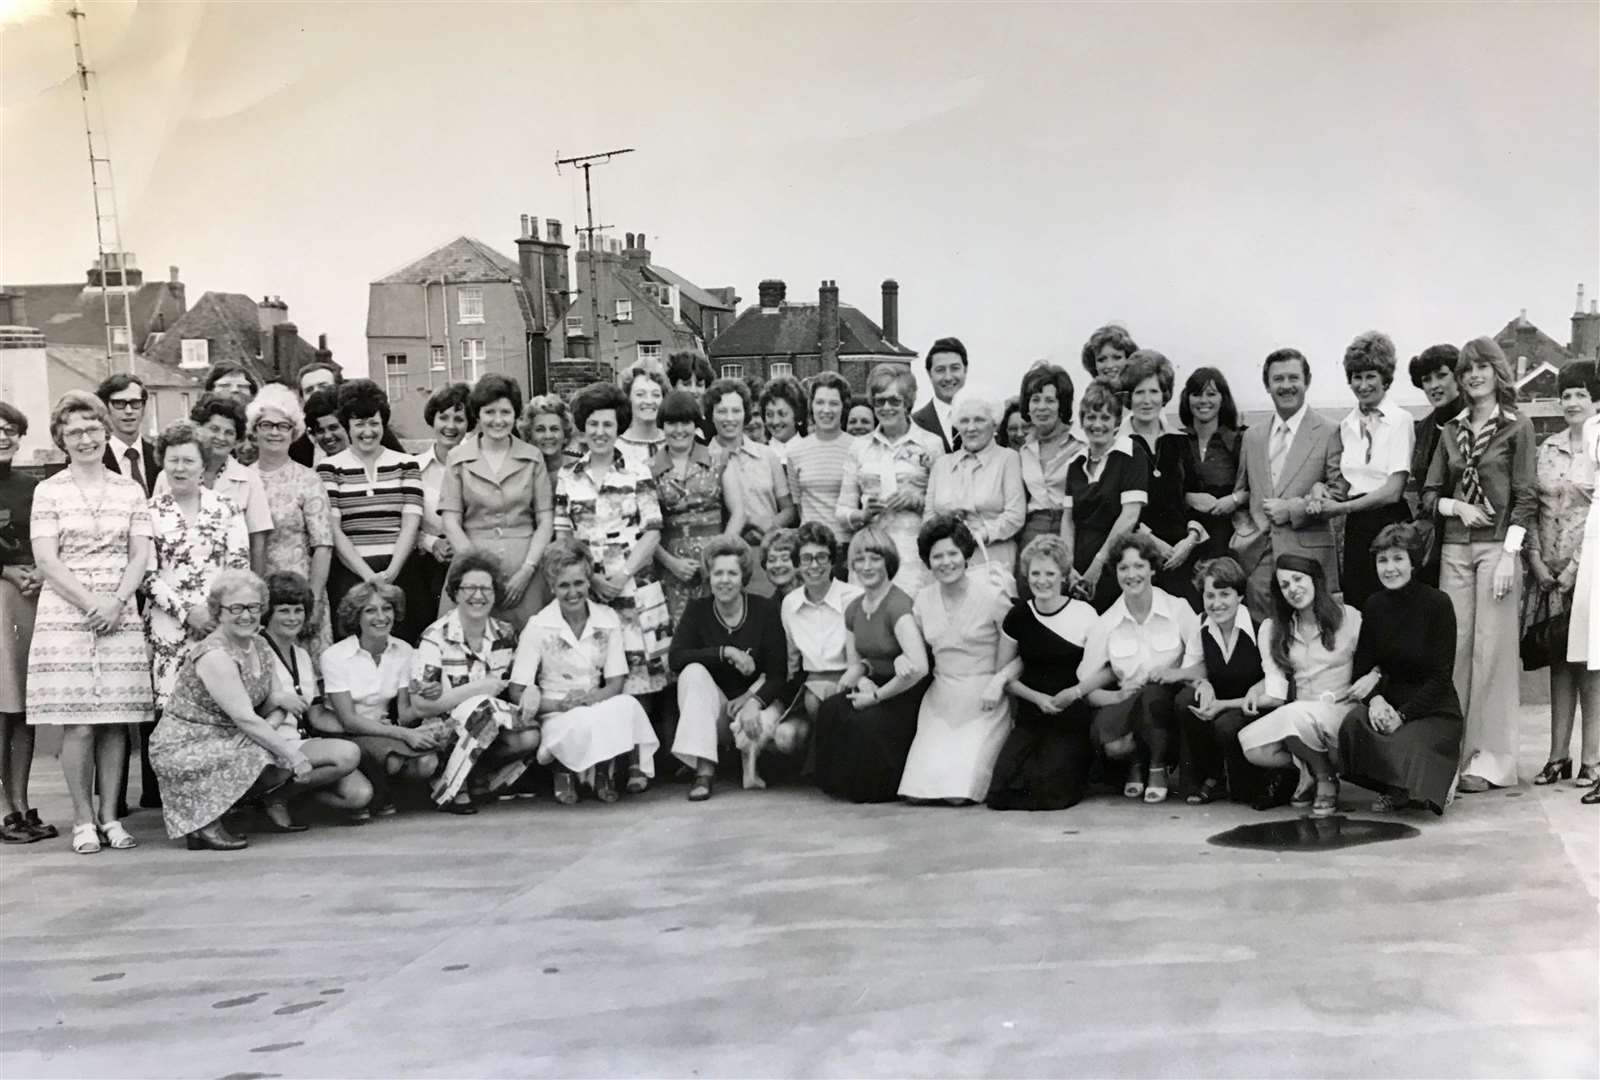 Staff photographed together in 1977